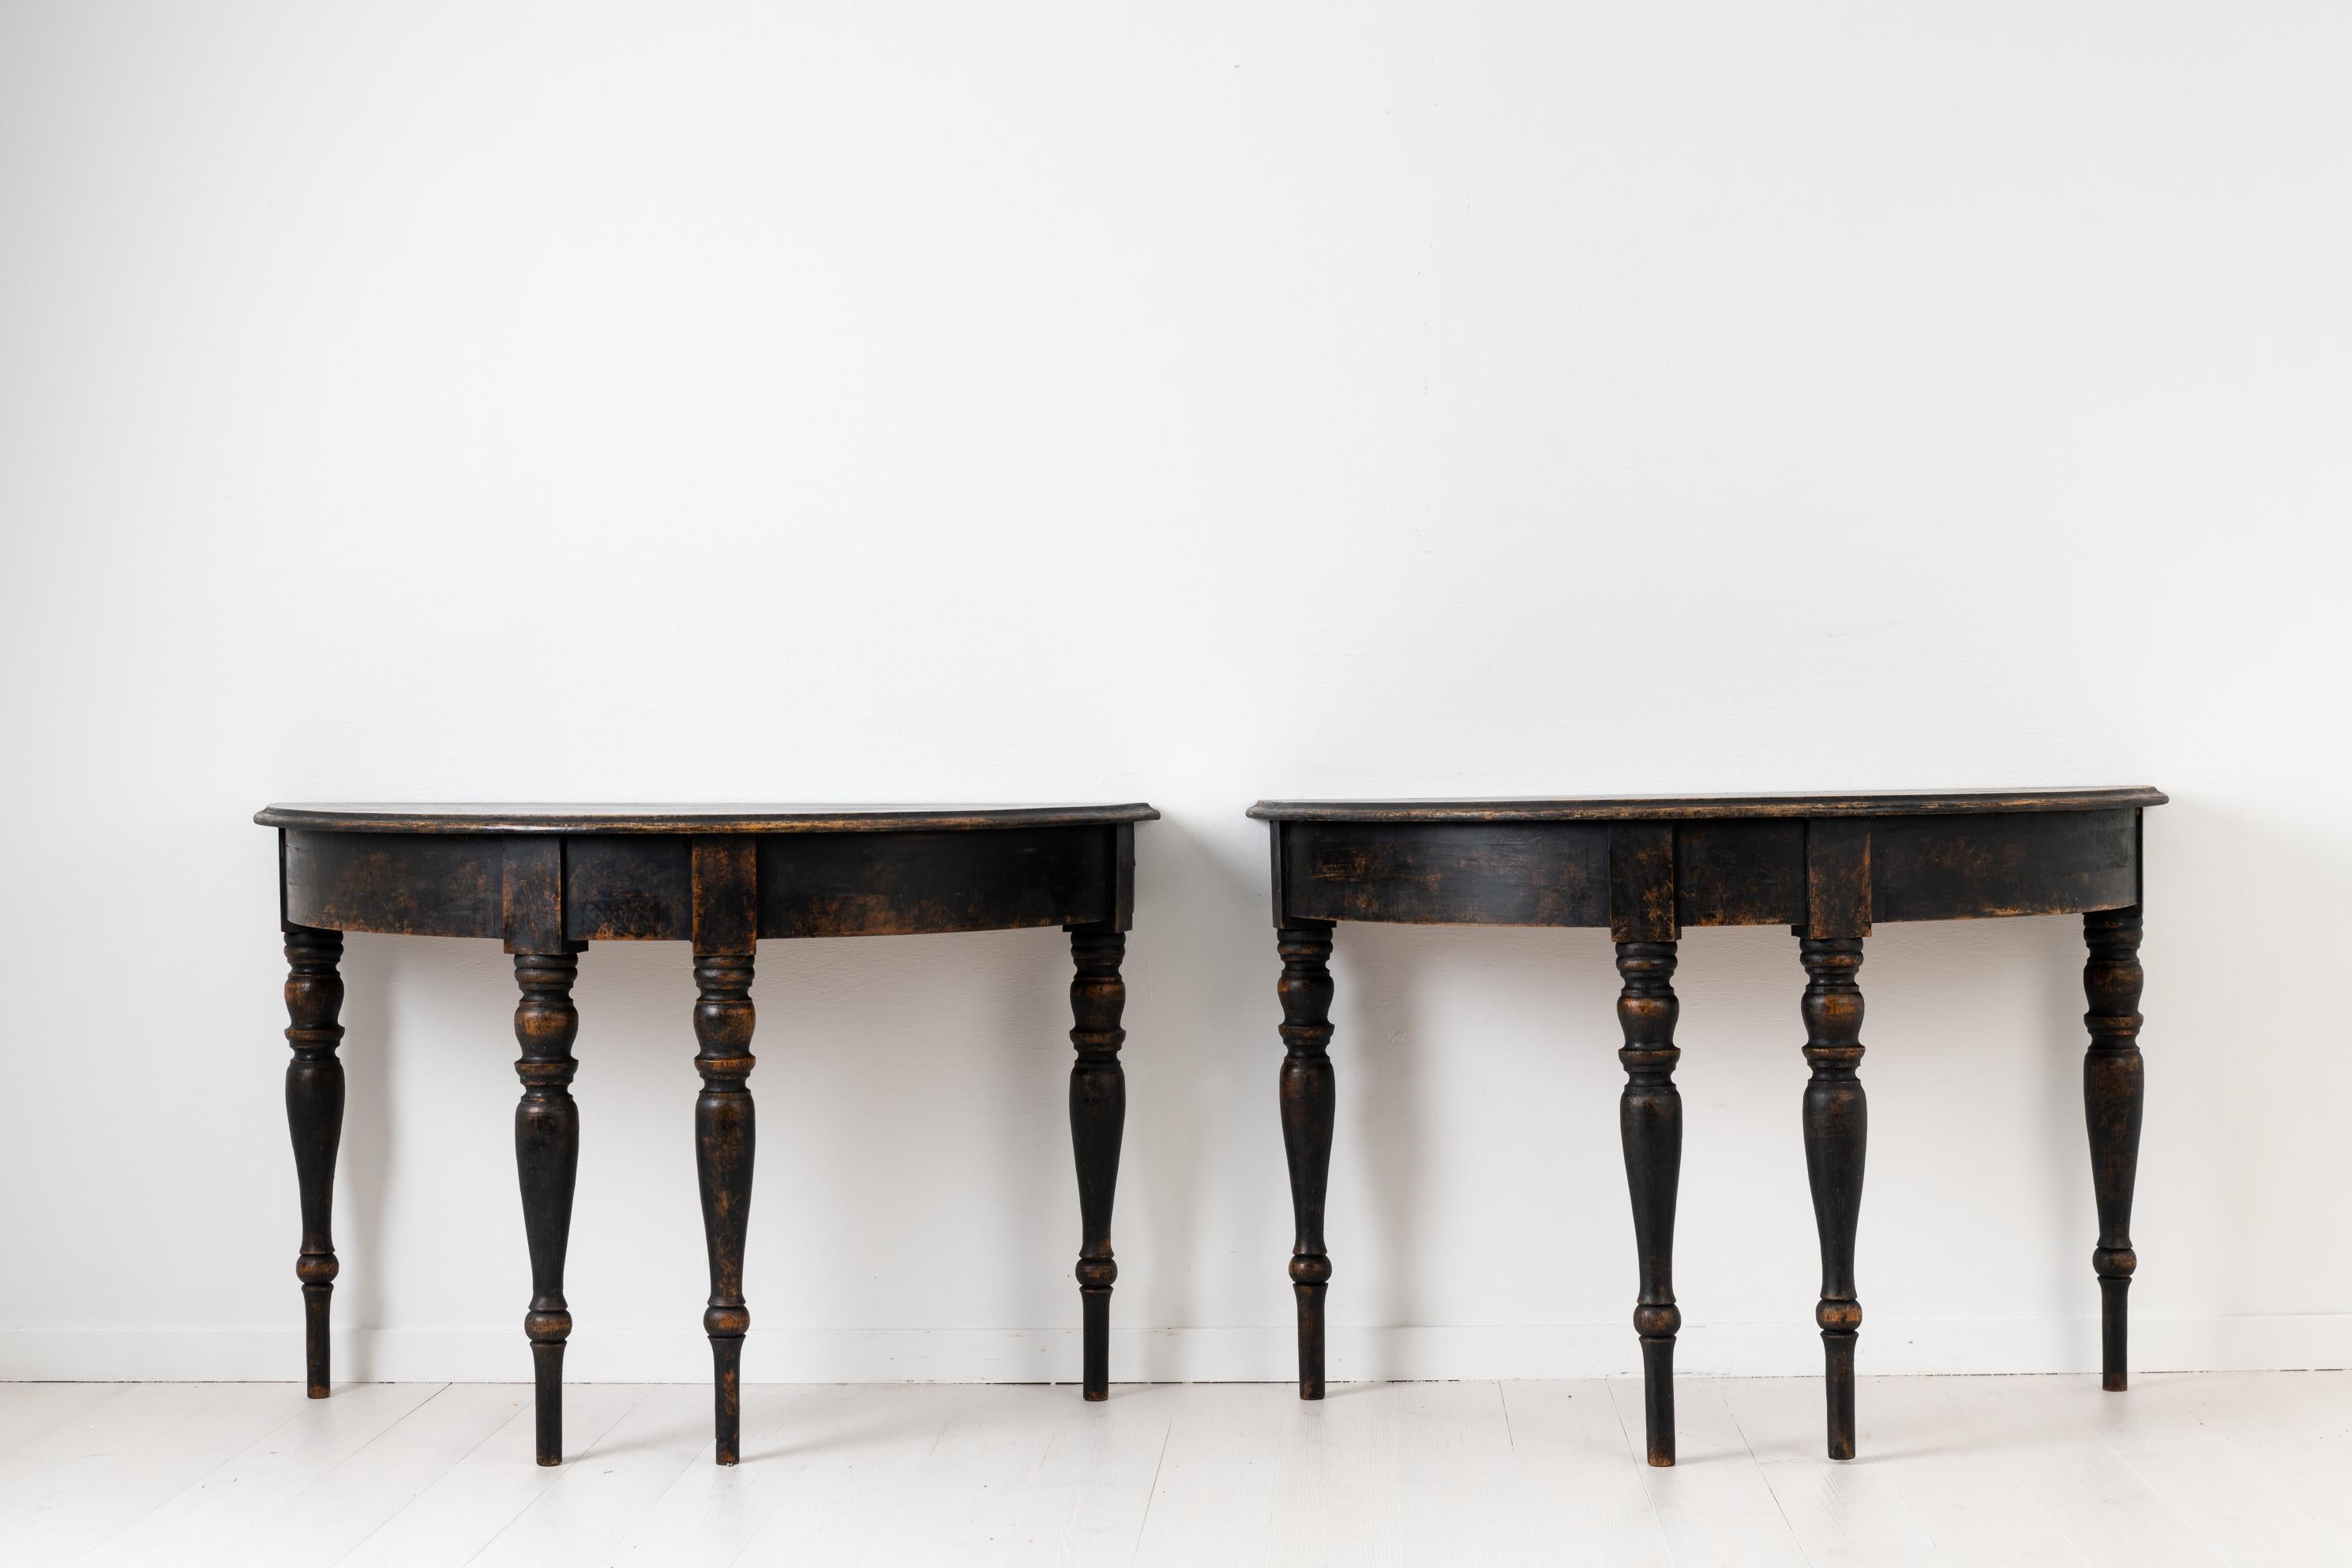 Swedish black demilune tables in Swedish pine. The tables are an original pair and two halves of a whole. They are from Sweden and made circa 1880. The black paint is distressed with some of the wood shining trough the paint and good patina. The